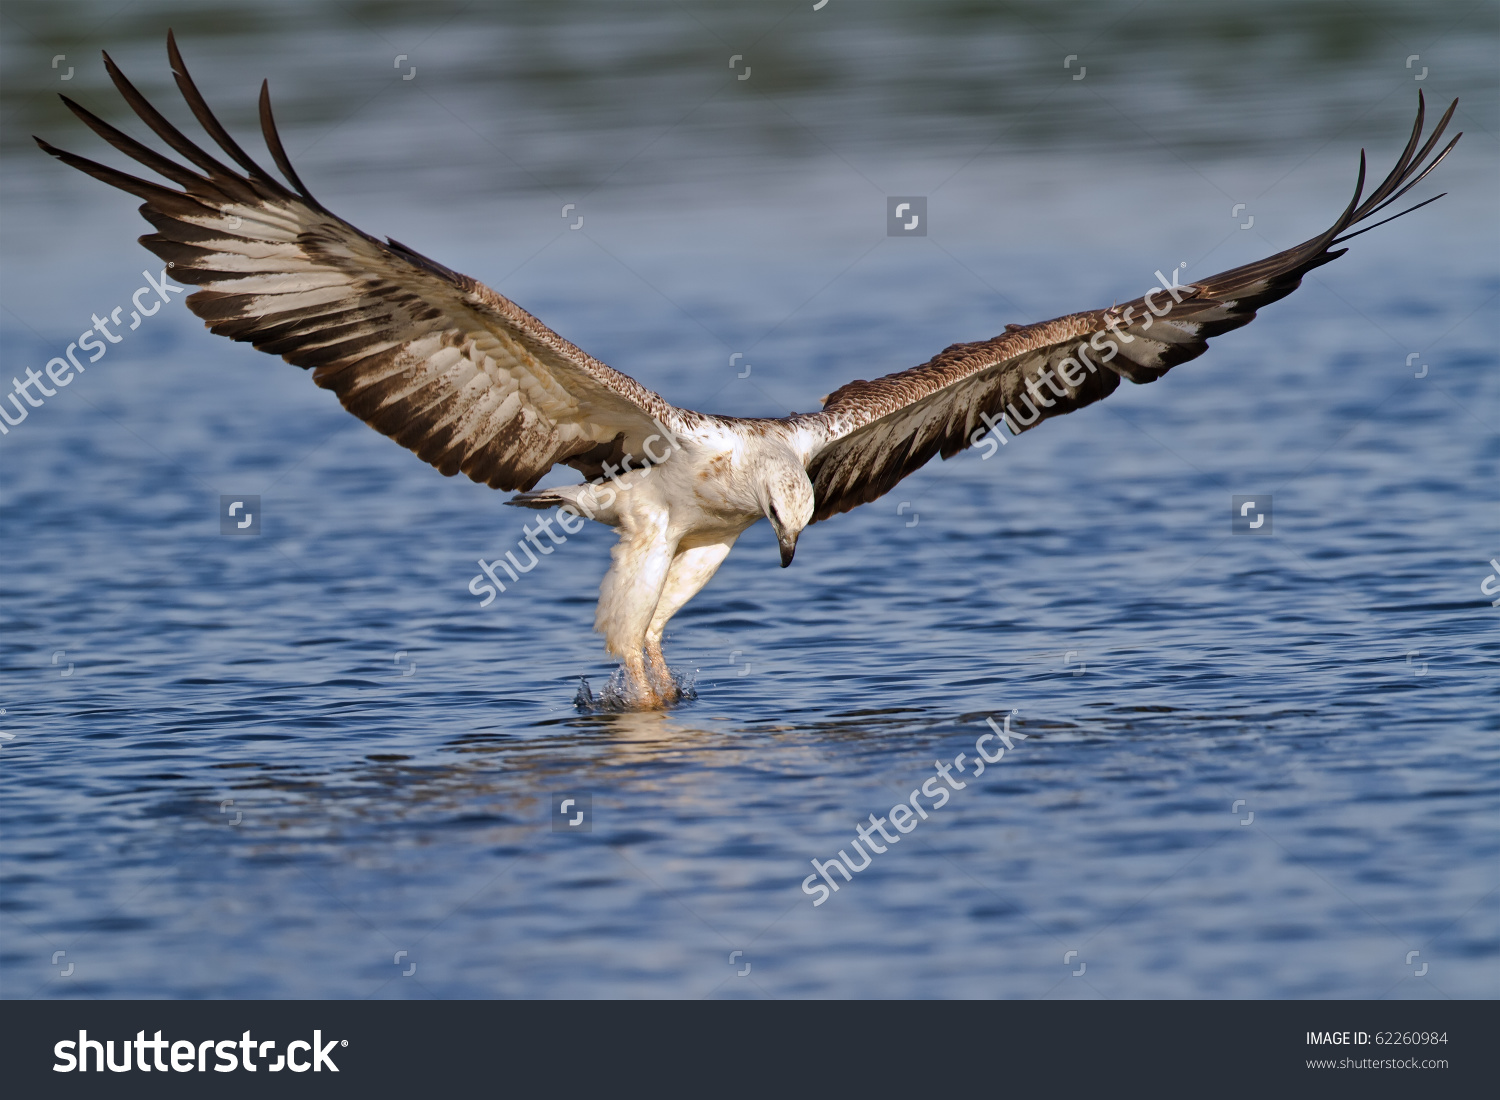 White-bellied Sea Eagle clipart #16, Download drawings